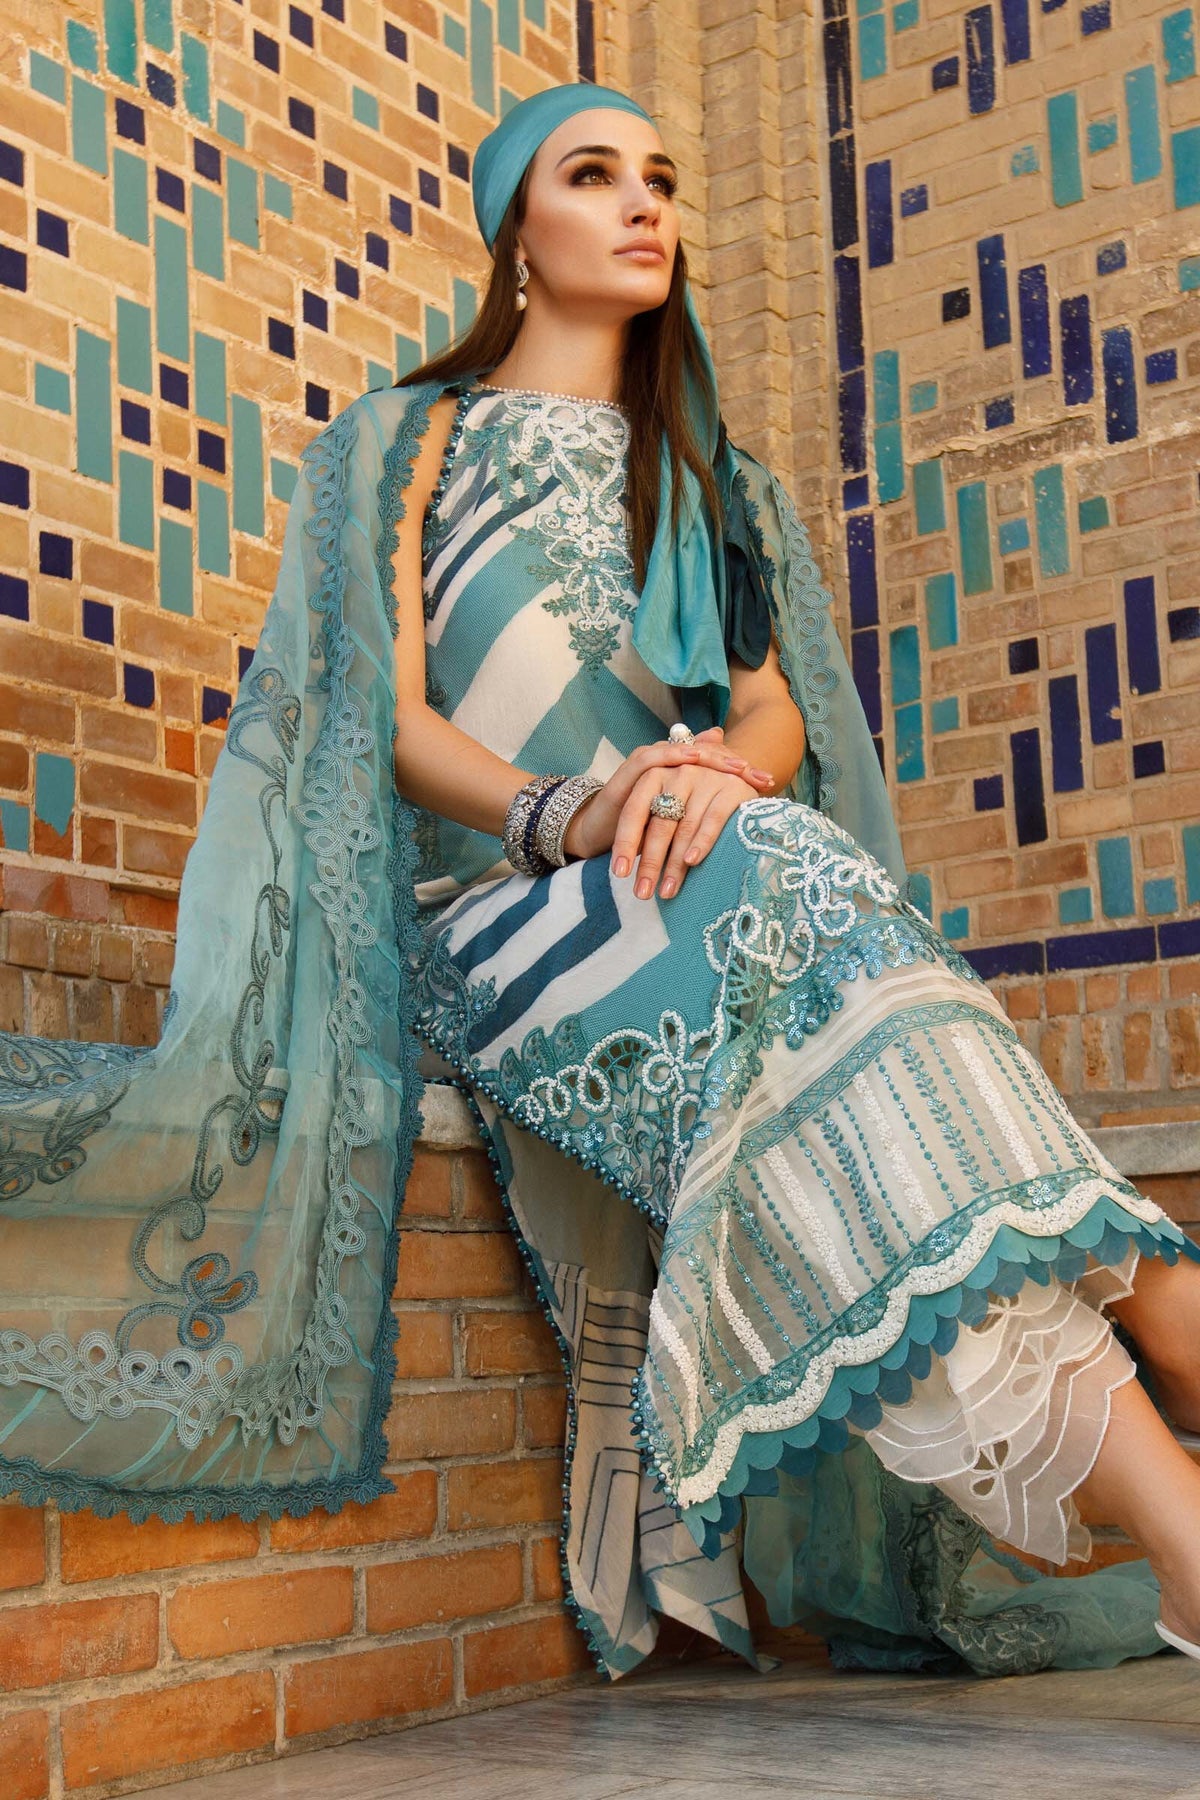  Maria.B Luxe Lawn - D-2314-B- Luxury Eid Lawn 2023 - Spring Summer 2023 - Shahana Collection UK